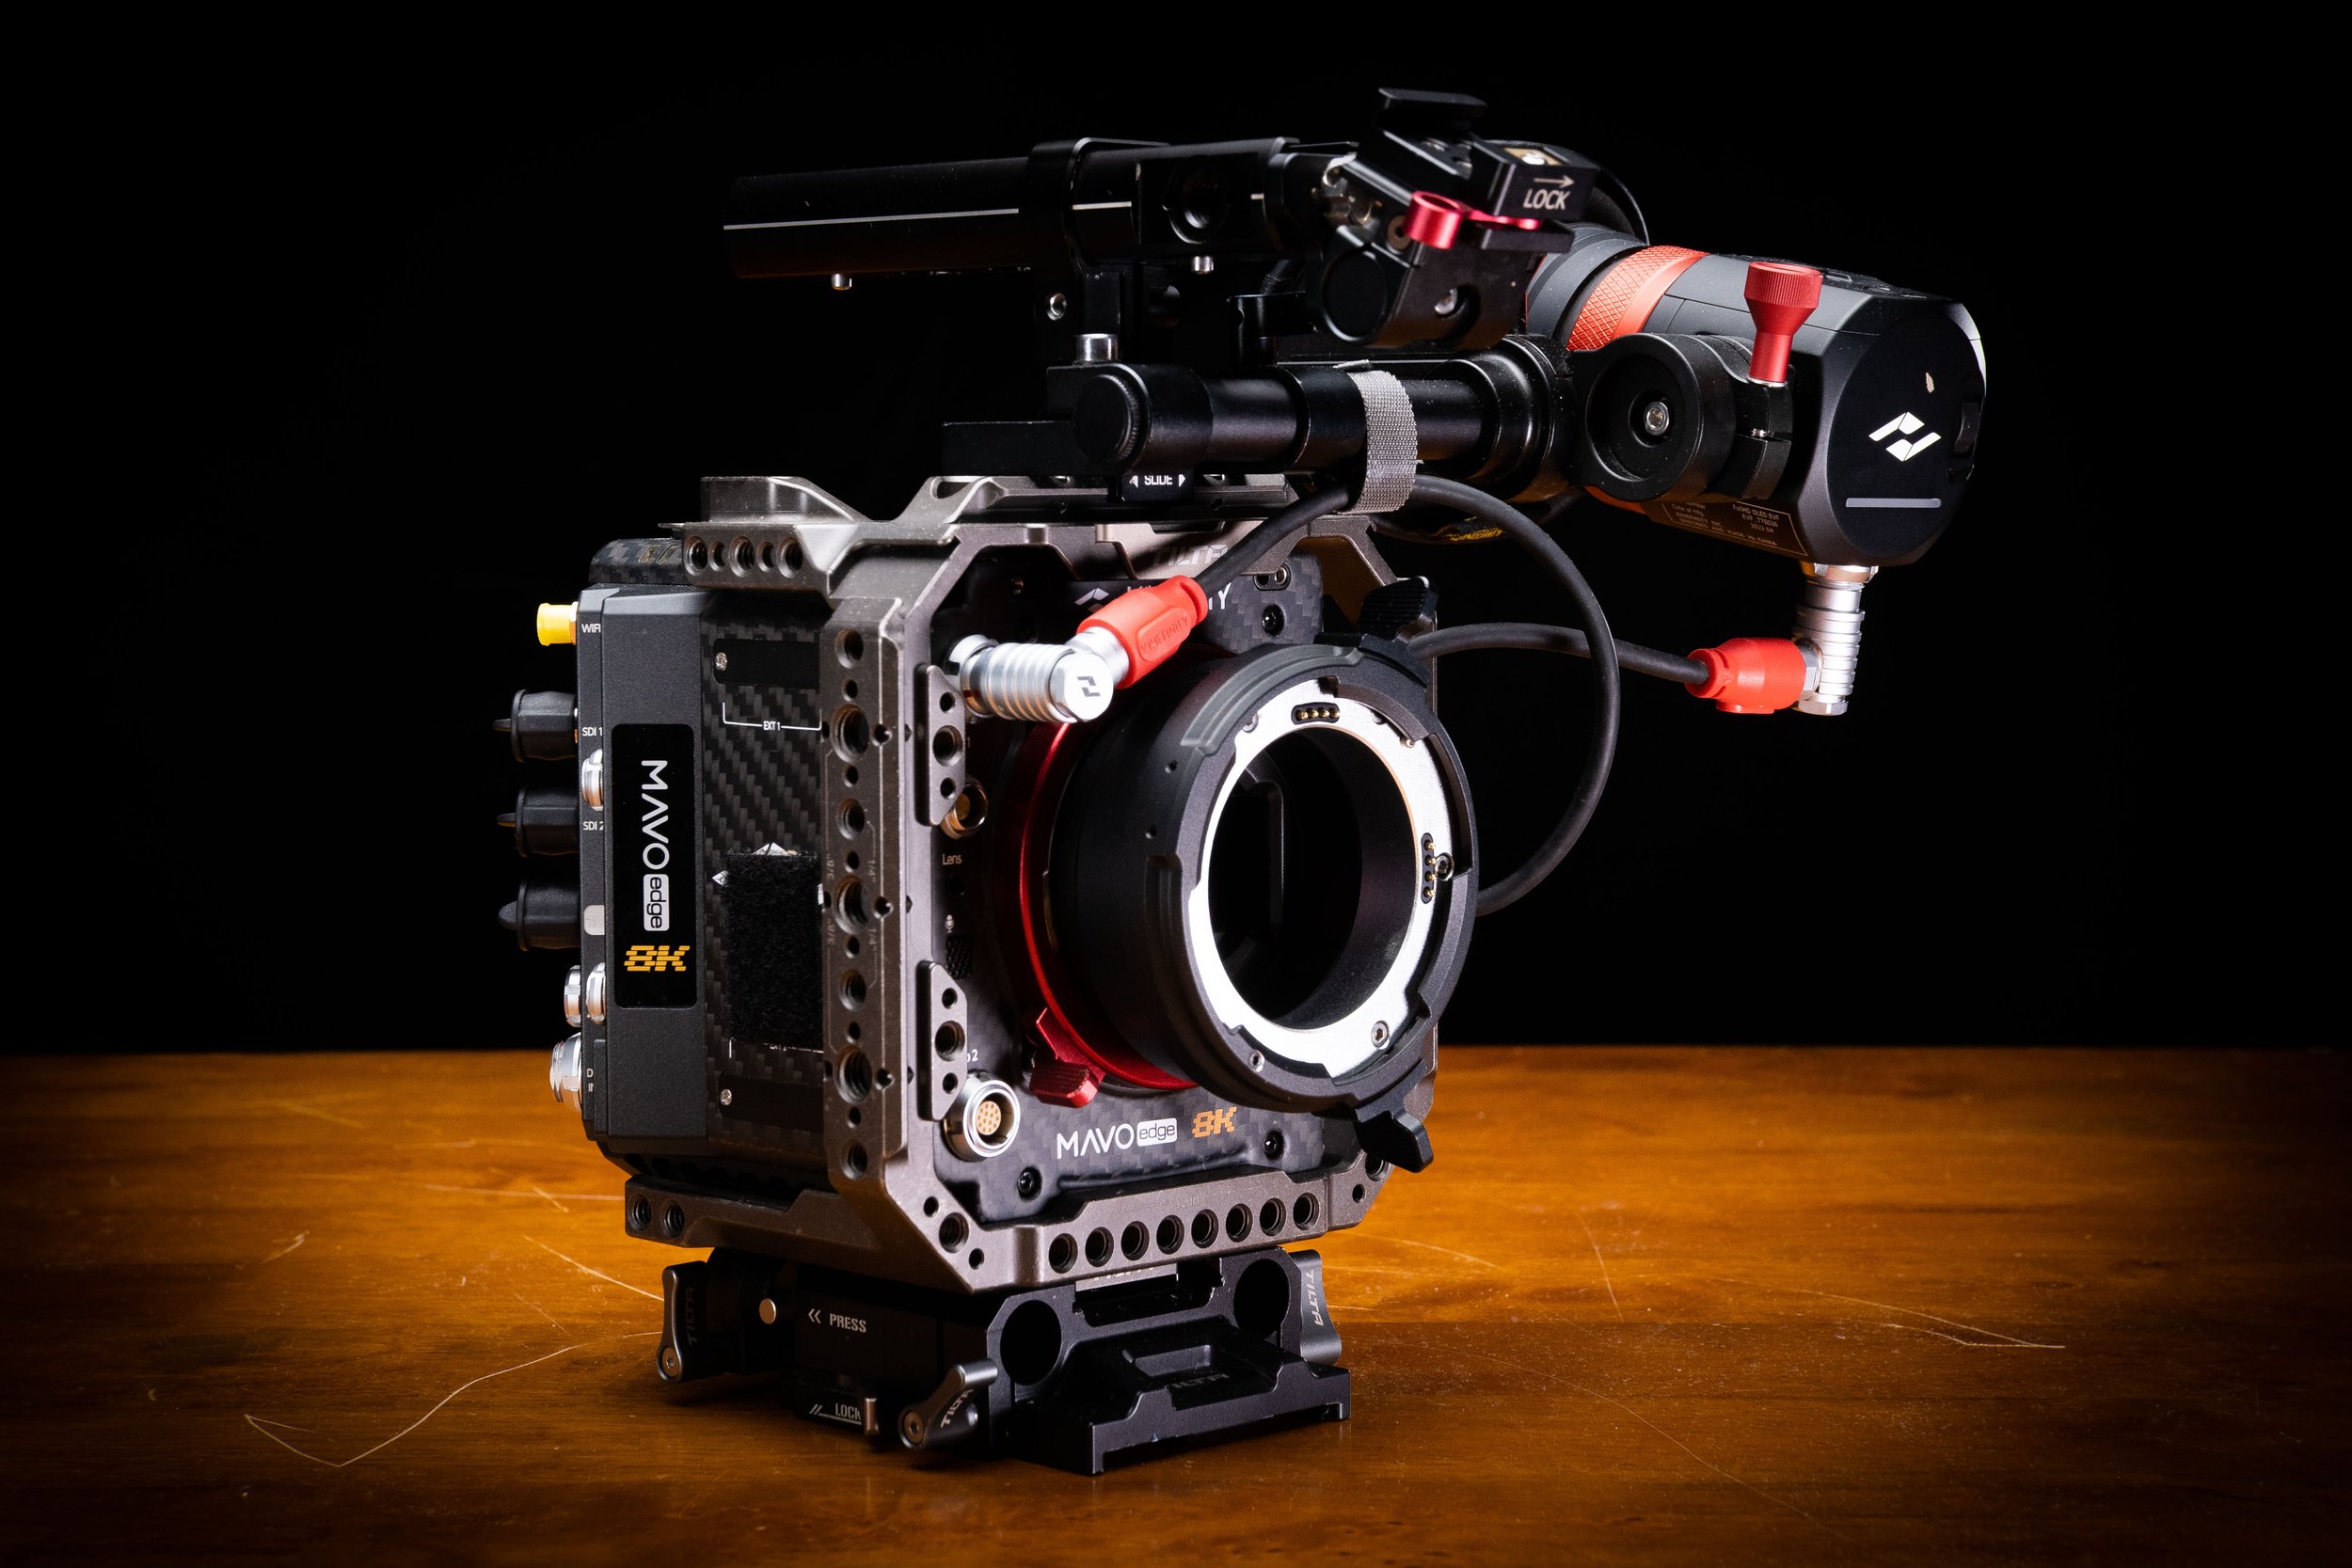 15mm LWS build w/ EVF